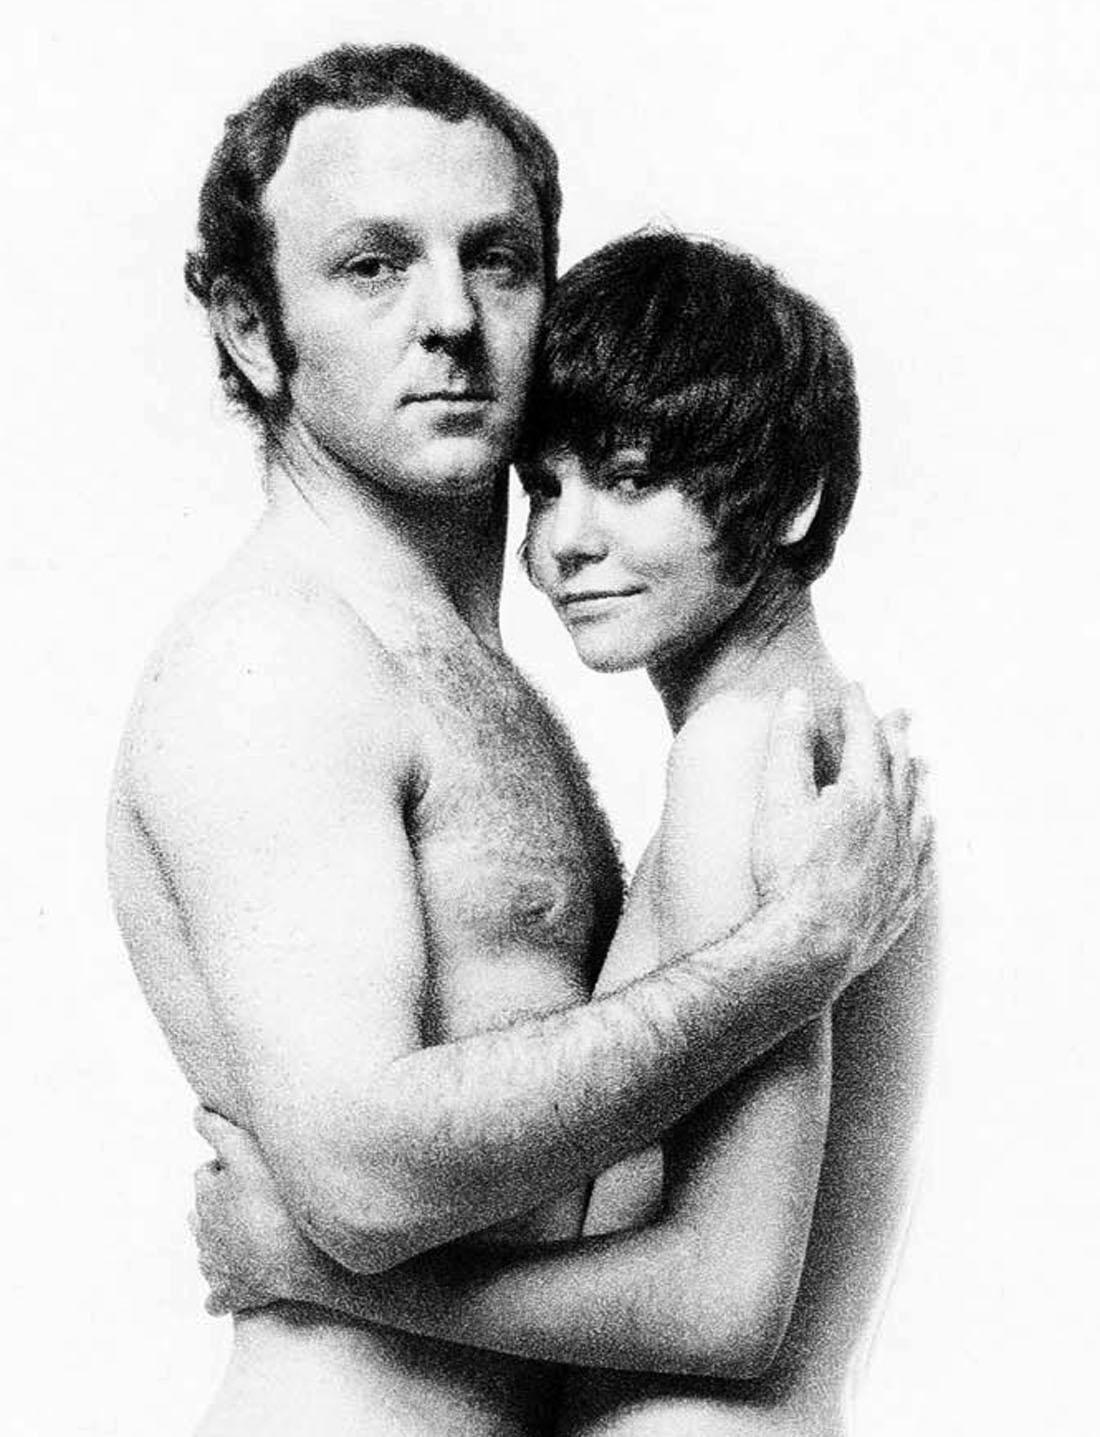 British pop artist Gerald Laing & wife Galina pose nude for wedding photos - Photograph by Jack Mitchell